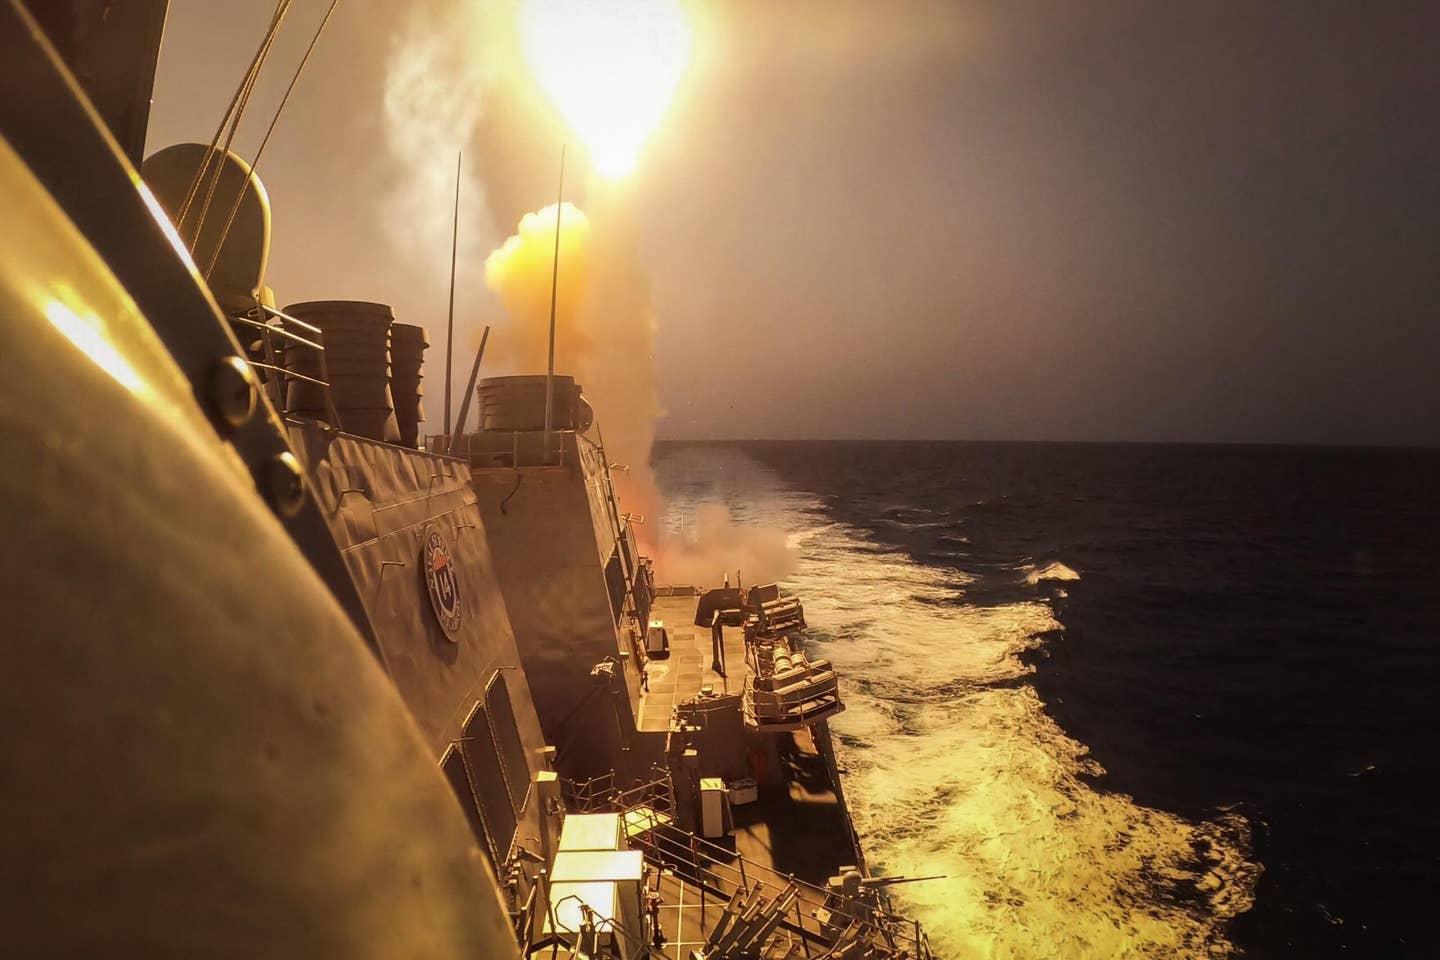 The <em>Arleigh Burke</em> class guided-missile destroyer <em>USS Carney</em> (DDG 64) fires a Standard Missile (SM) 2 to defeat a combination of Houthi missiles and unmanned aerial vehicles in the Red Sea, Oct. 19, 2023. Carney is deployed to the U.S. 5th Fleet area of operations to help ensure maritime security and stability in the Middle East region. (U.S. Navy photo by Mass Communication Specialist 2nd Class Aaron Lau)